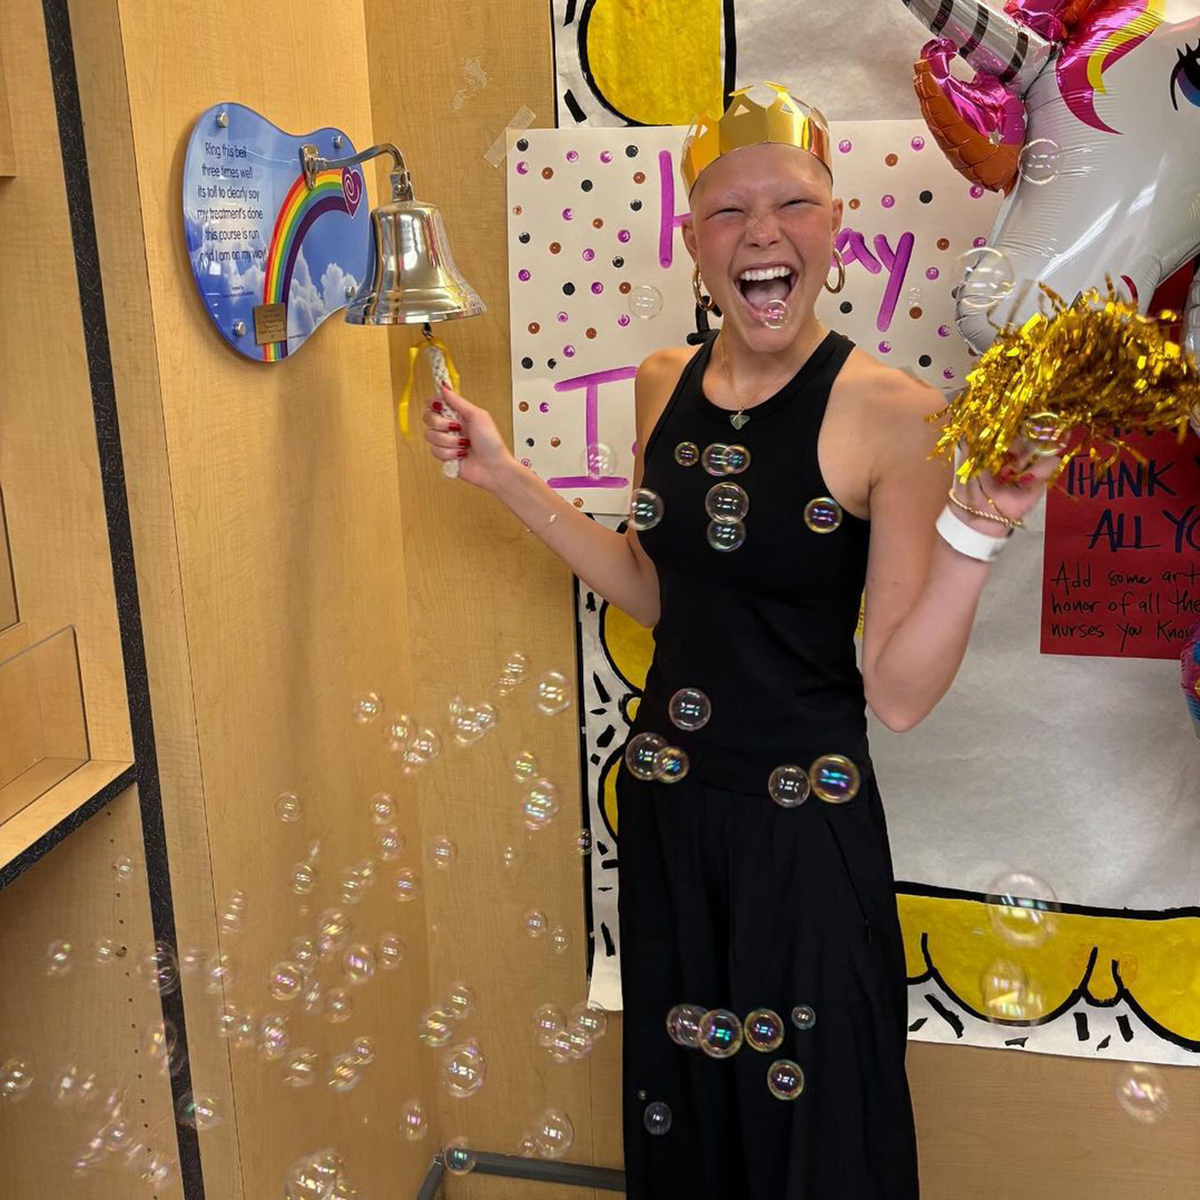 Isabella Strahan Celebrates Being Officially Cancer-Free